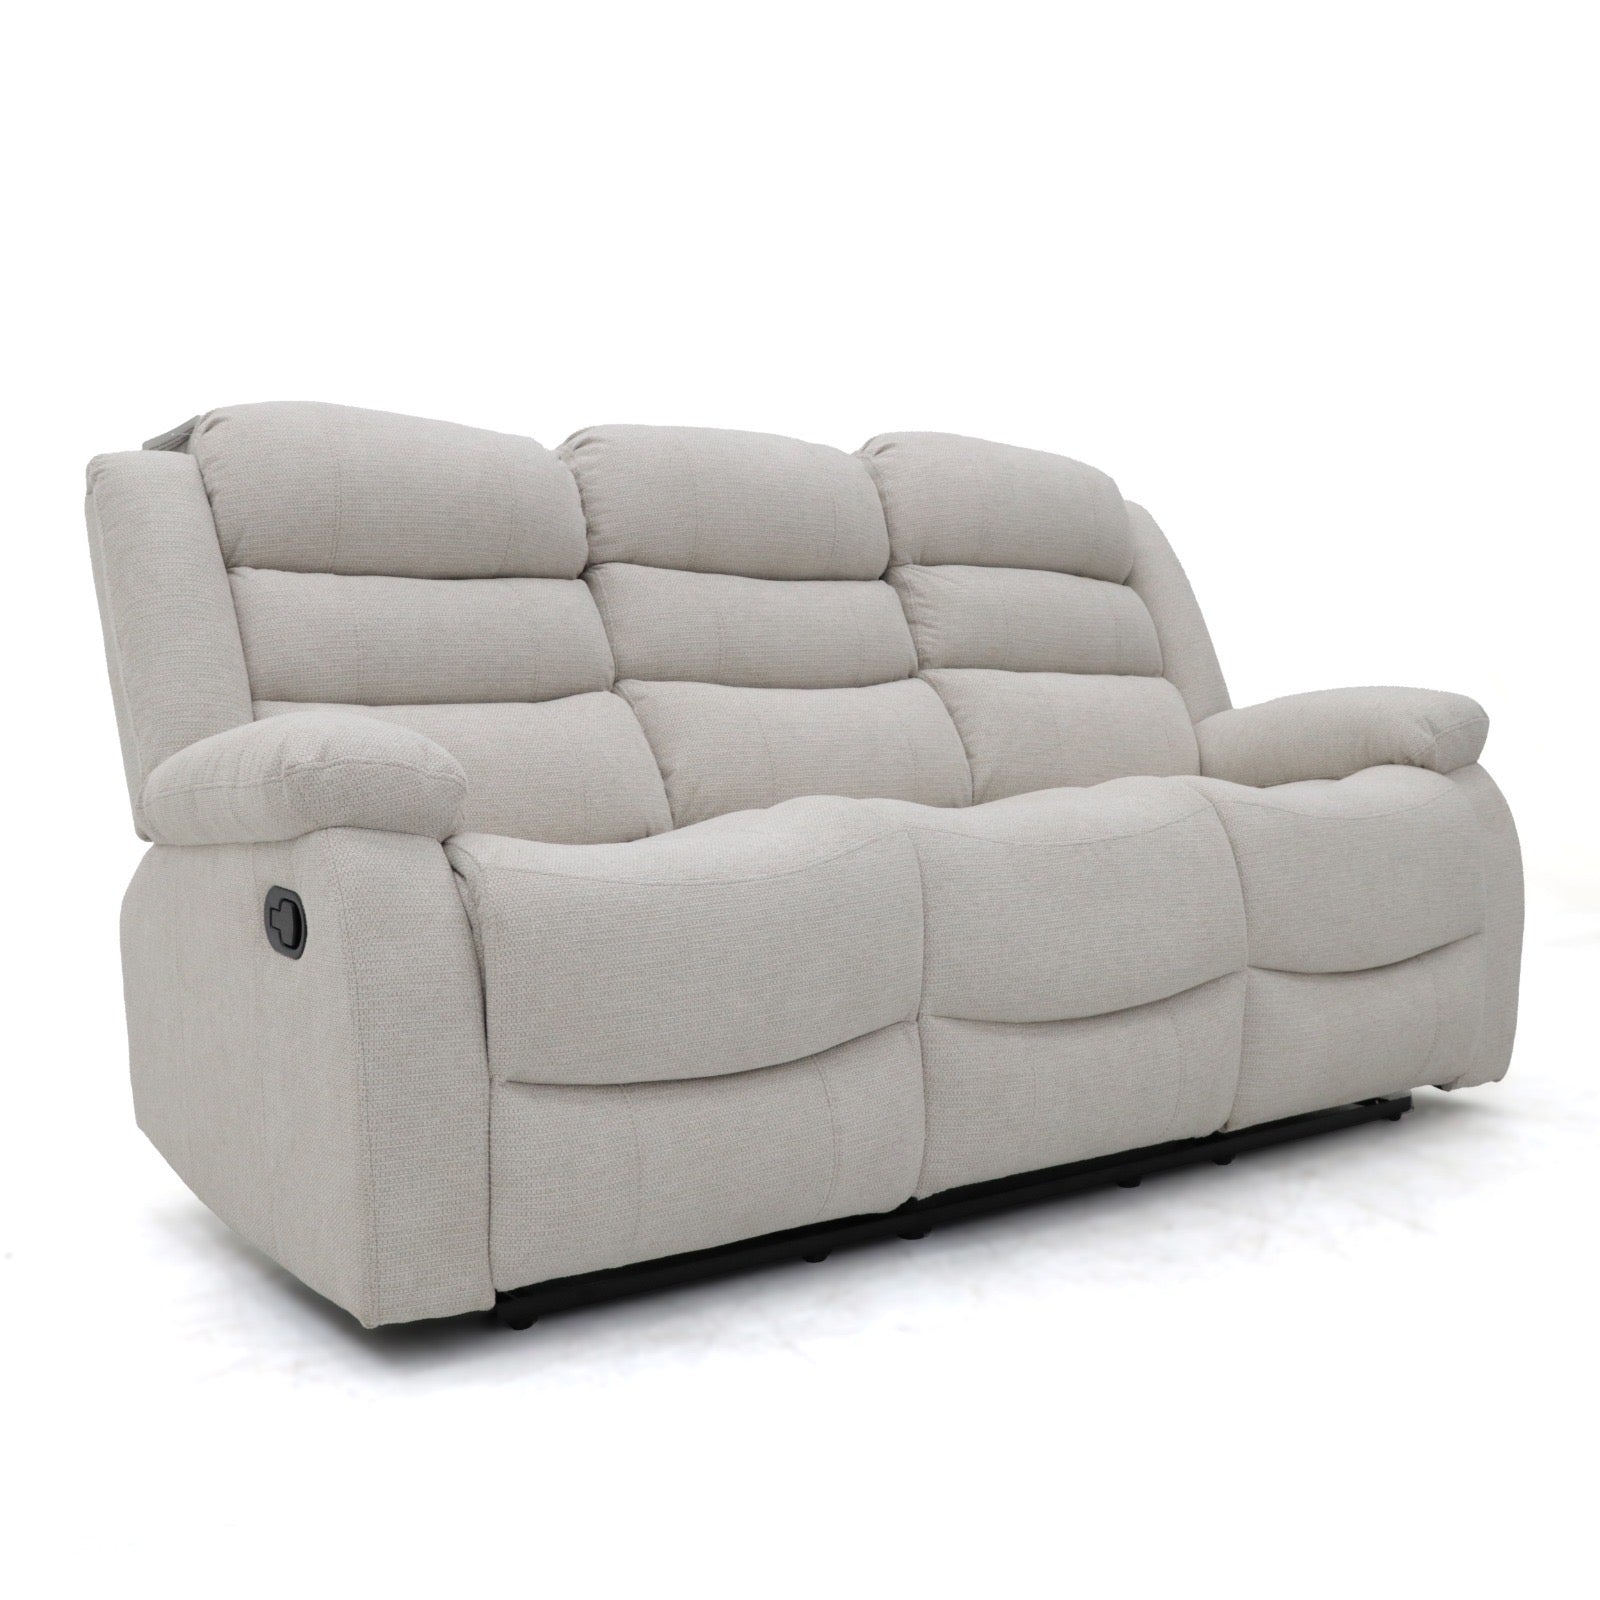 Augusta 3 Seater and 2 Seater Manual Recliner Beige Fabric